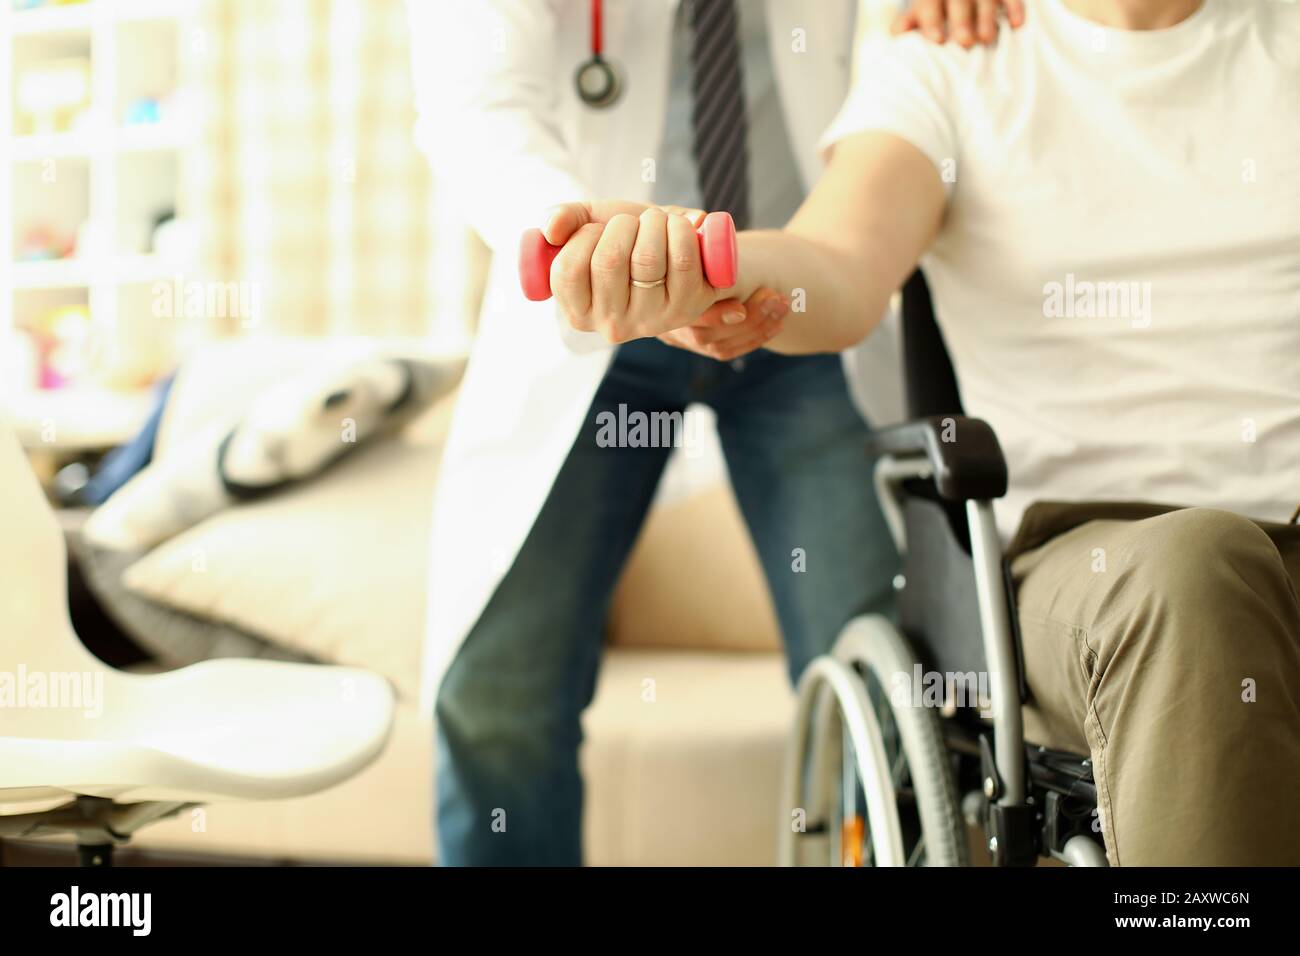 Male doctor helps lift dumbbell to disabled patient rehabilitation therapy concept. Stock Photo